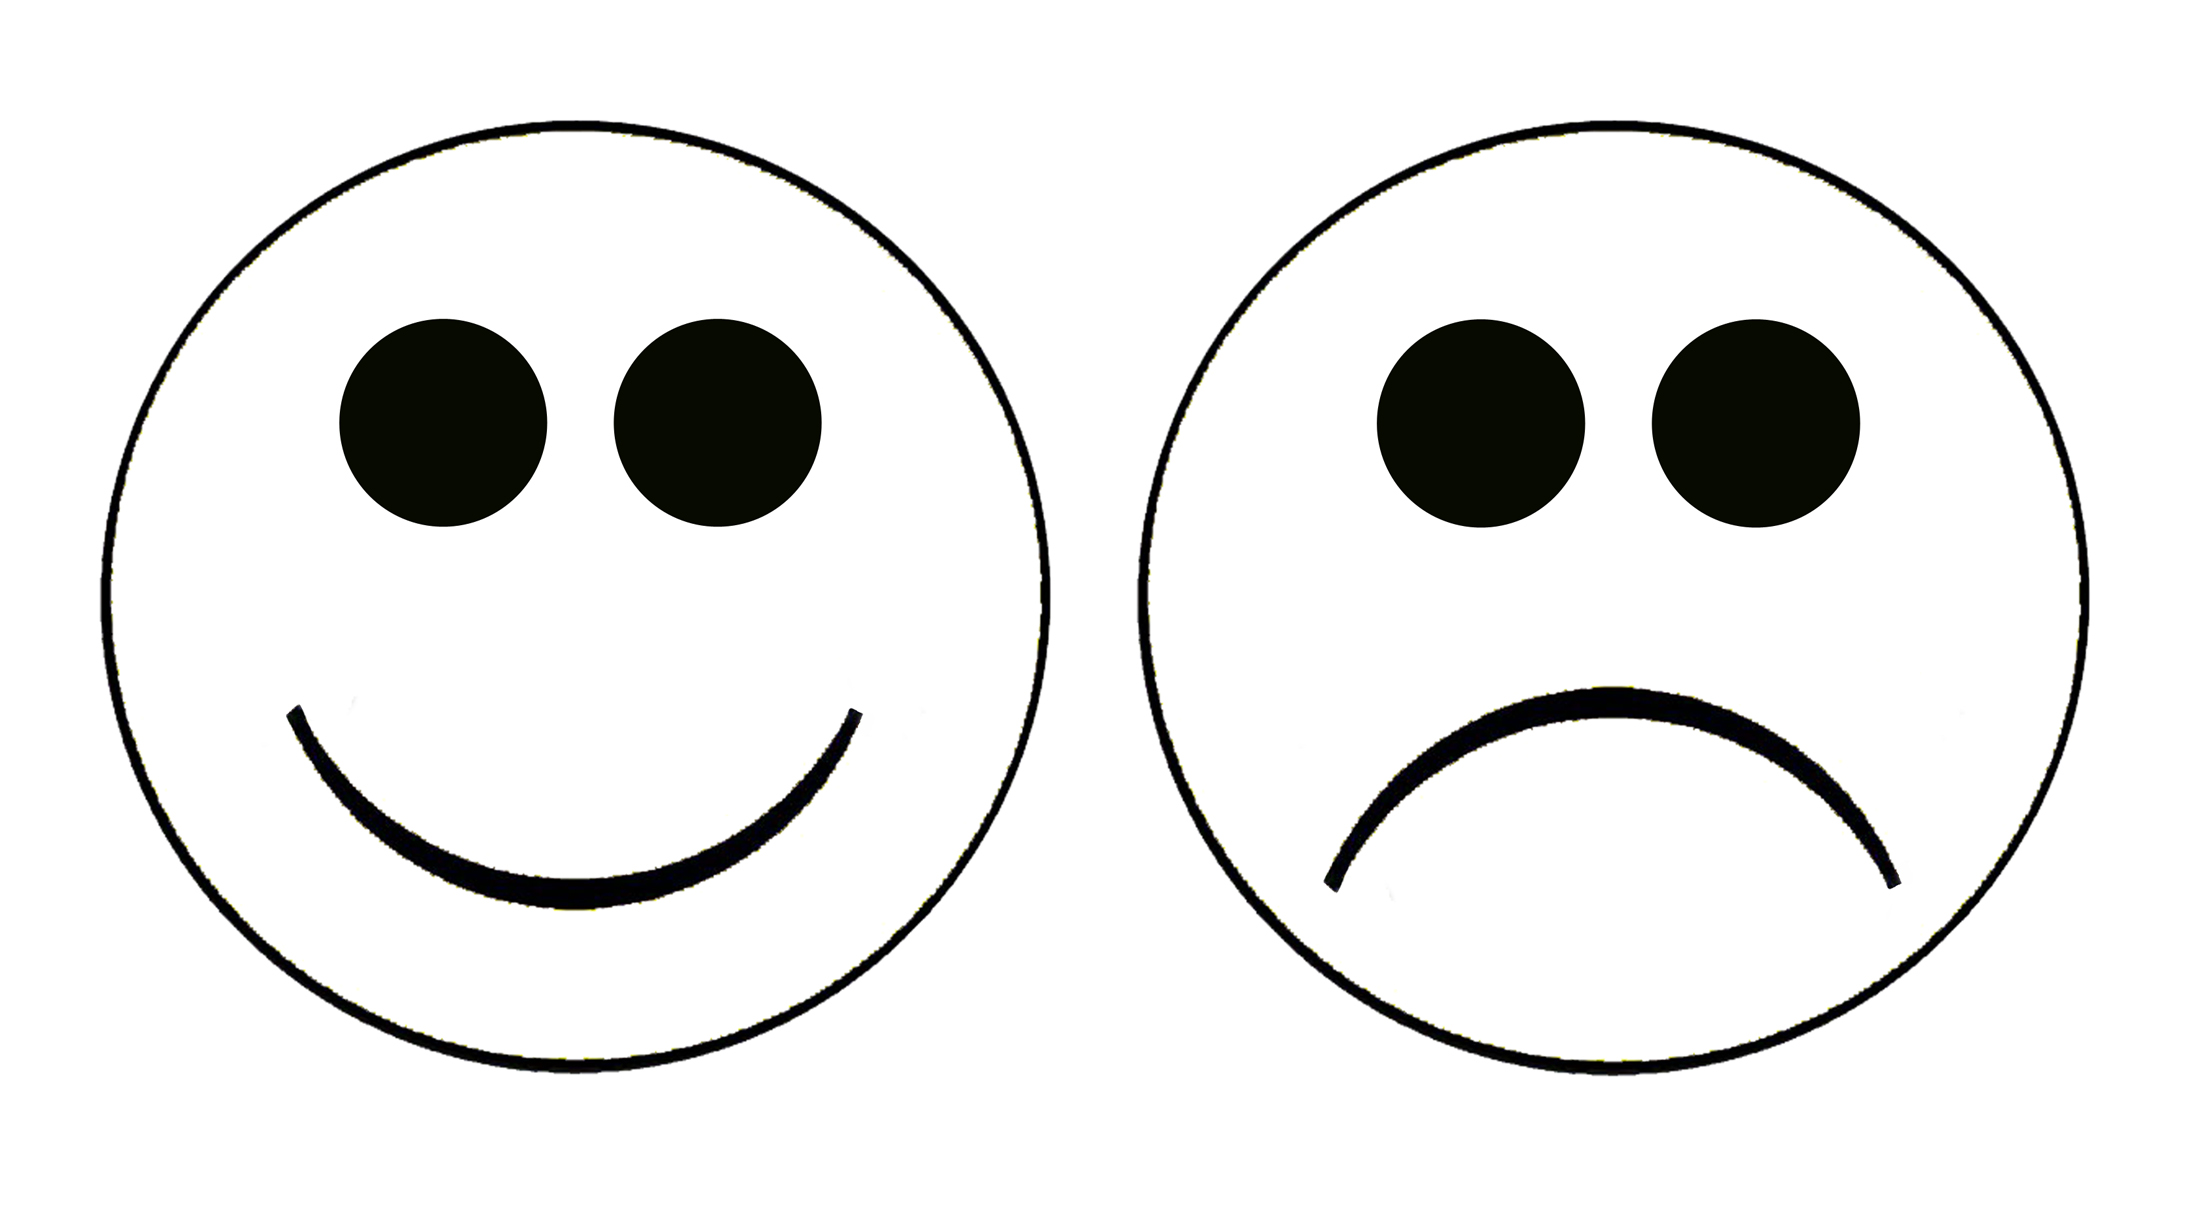 Smiley face  black and white smiley face clip art to download